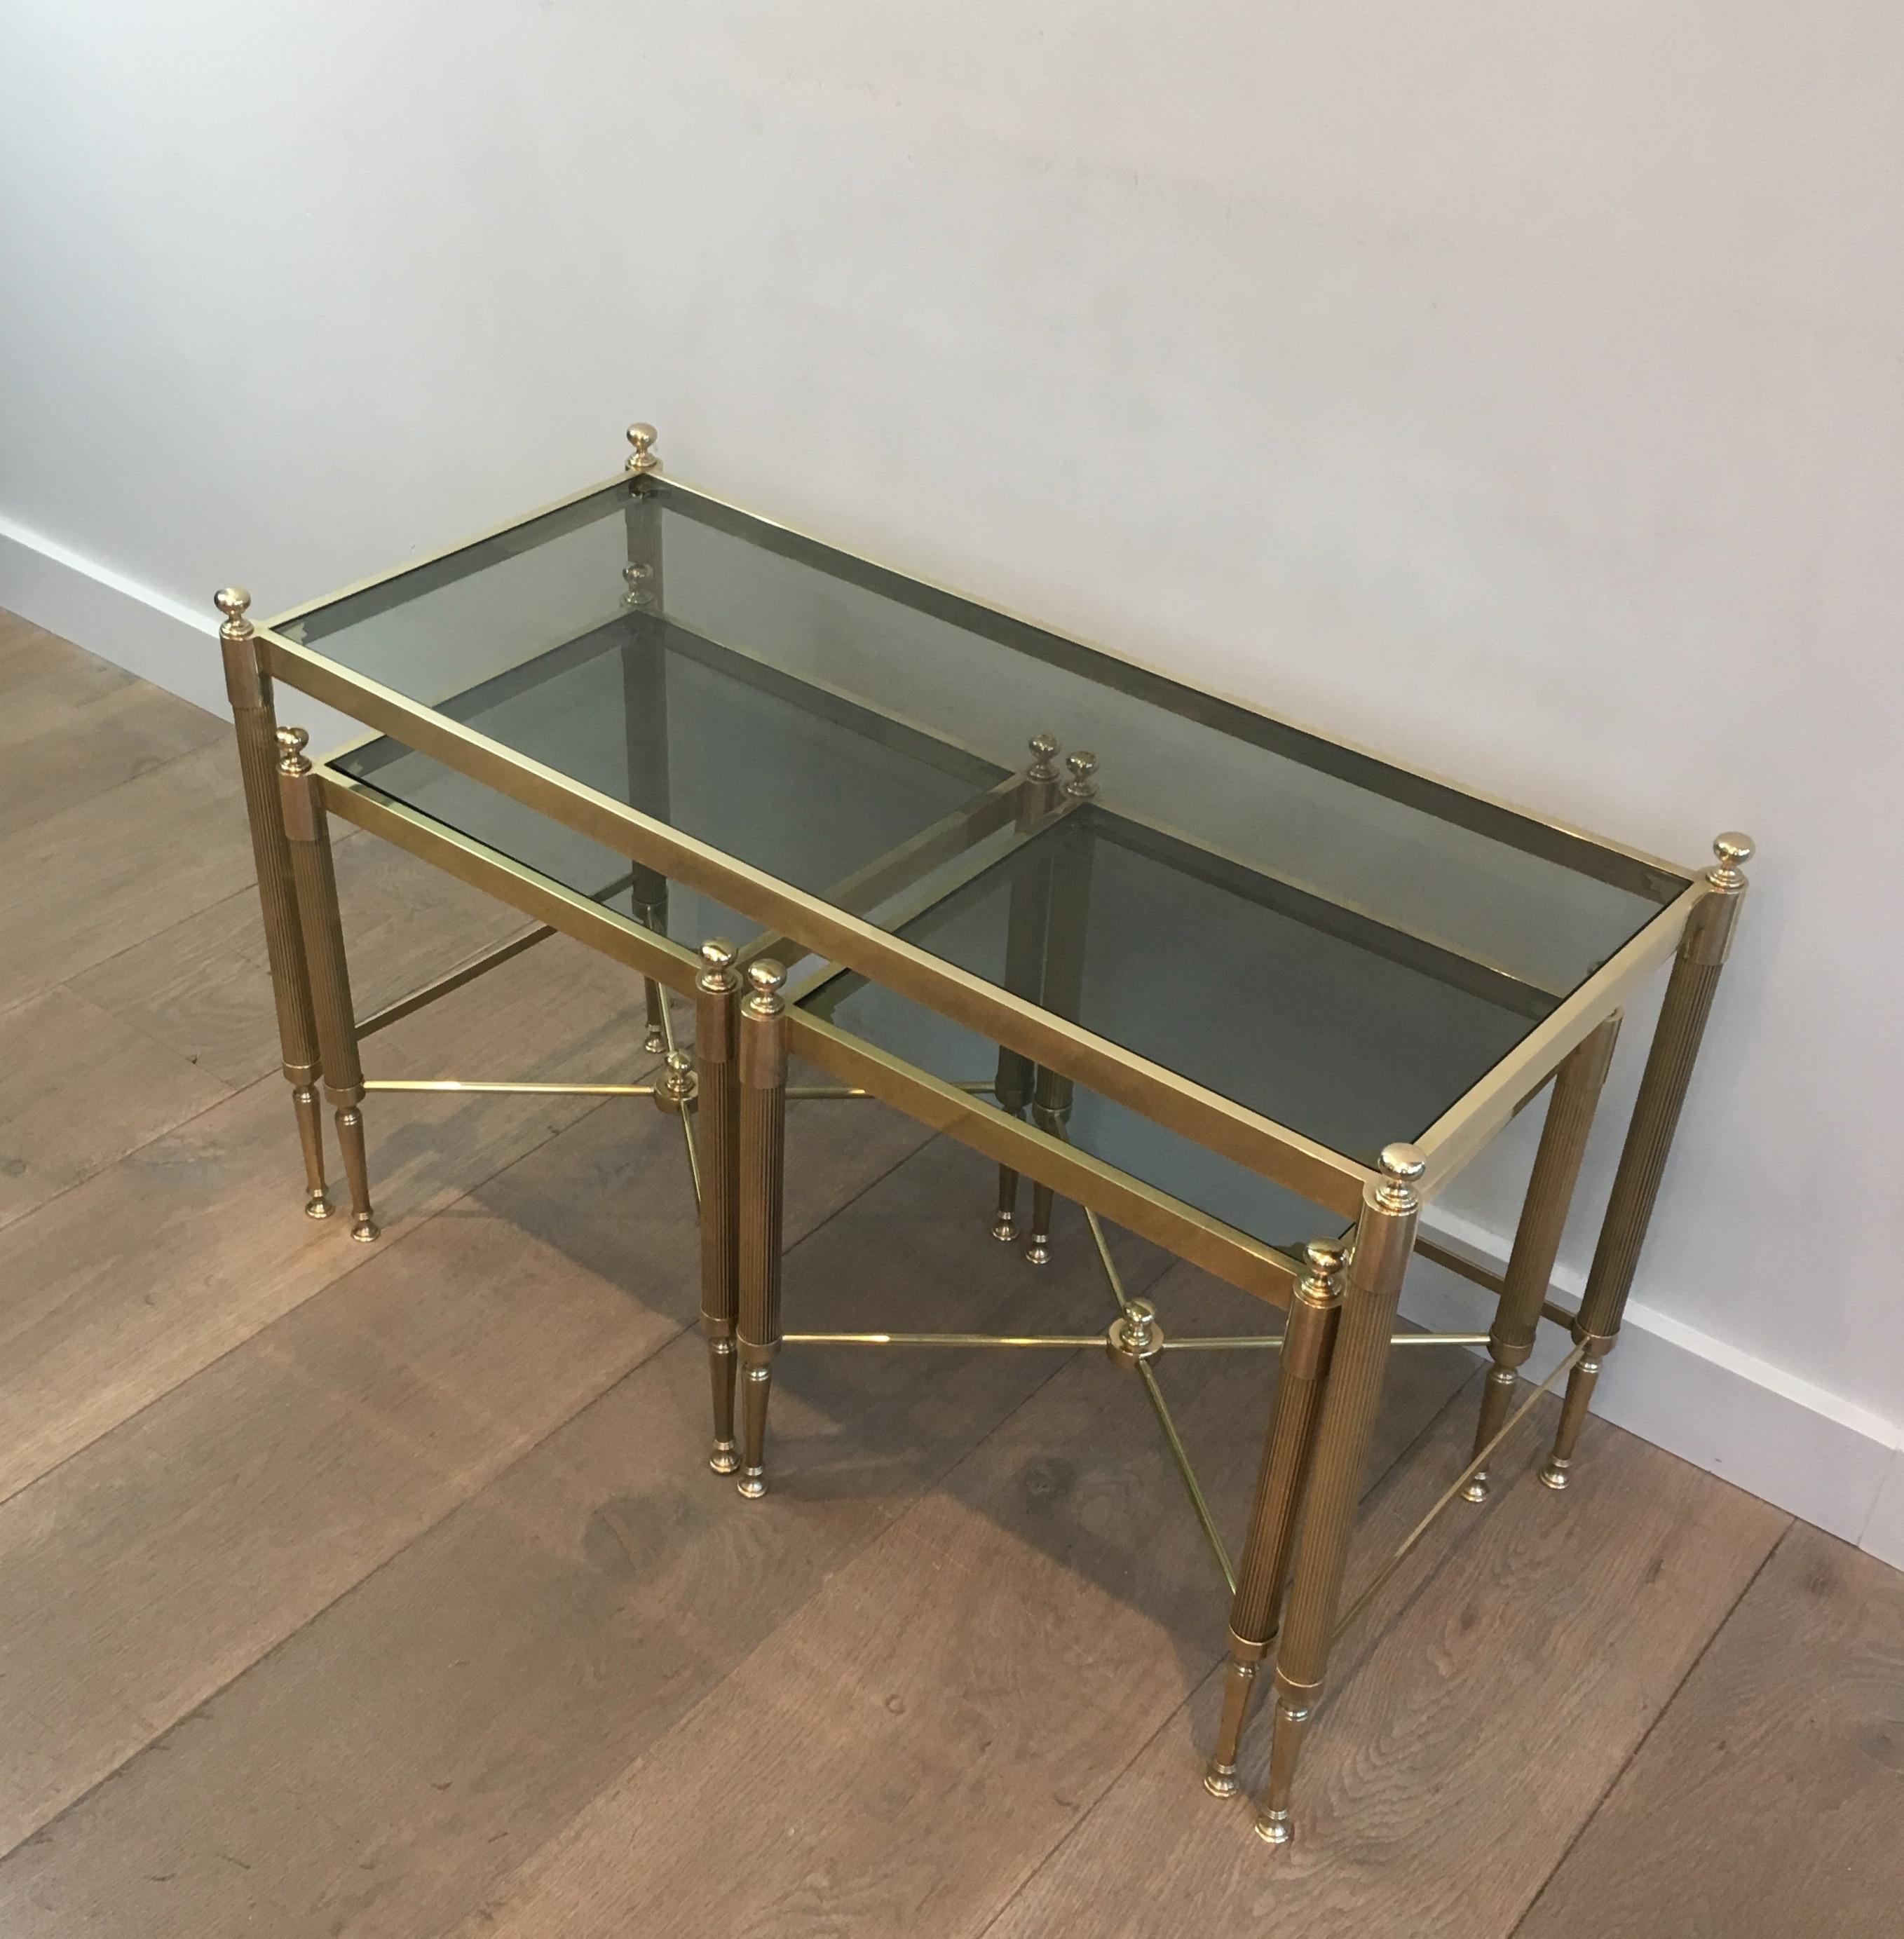 Tripartite Brass Coffee Table made of a Main Table and 2 Nesting Side Tables 14